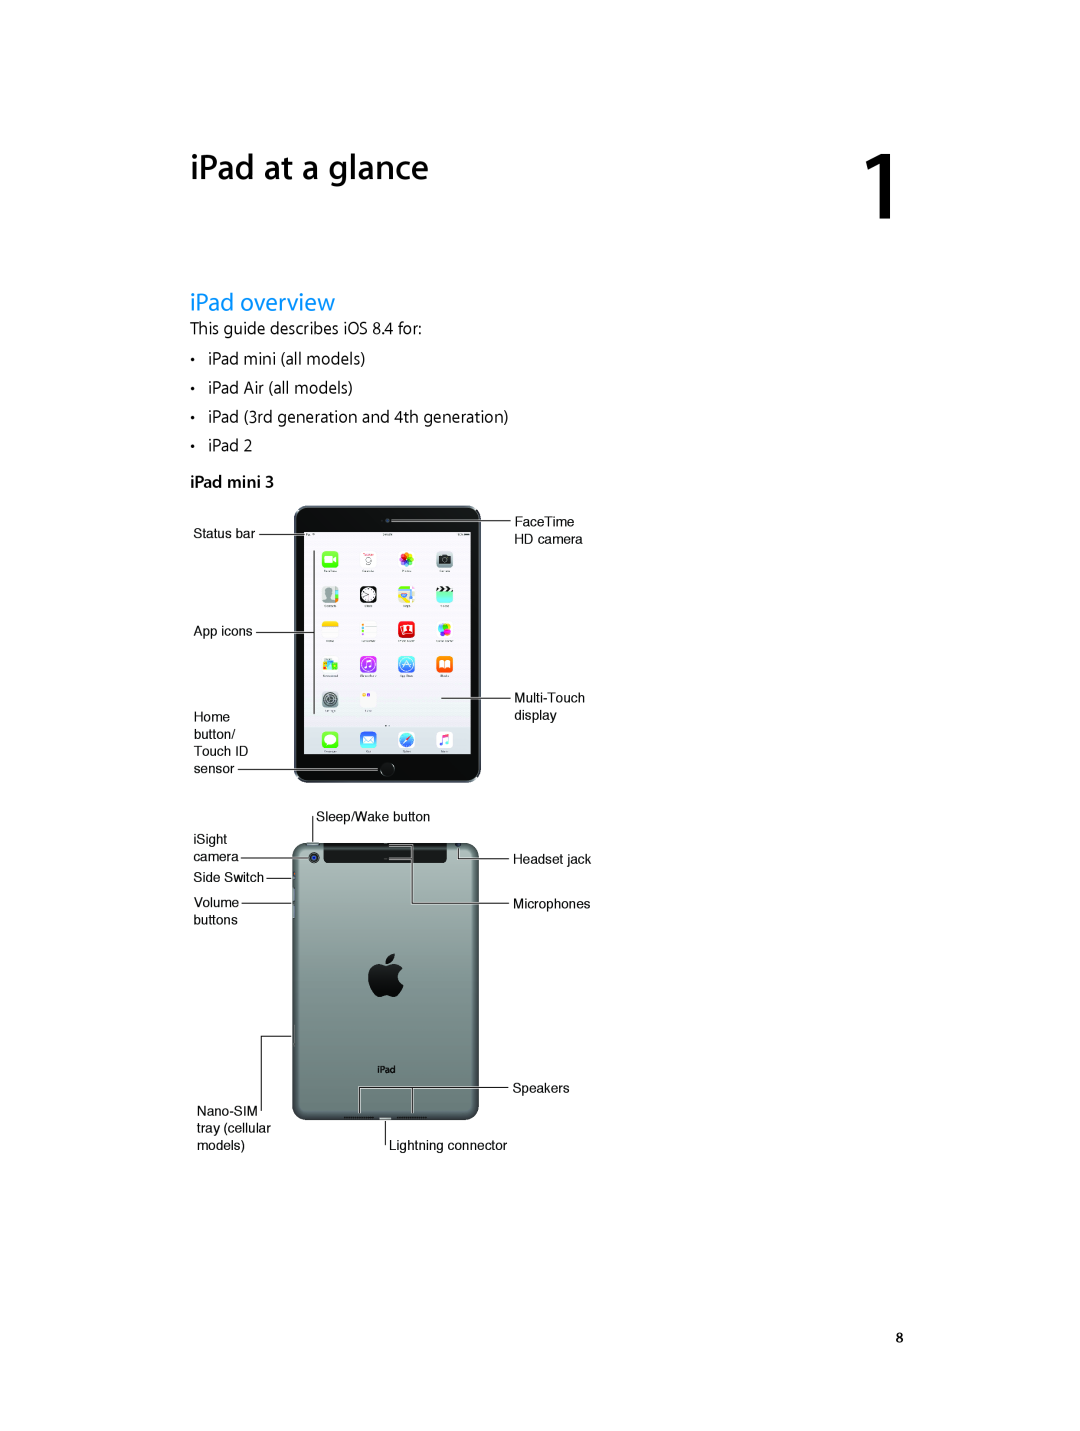 Apple MD519LL/A iPad at a glance, iPad overview, Status bar, FaceTime, iSight, Sleep/Wake button, camera, buttons, Volume 